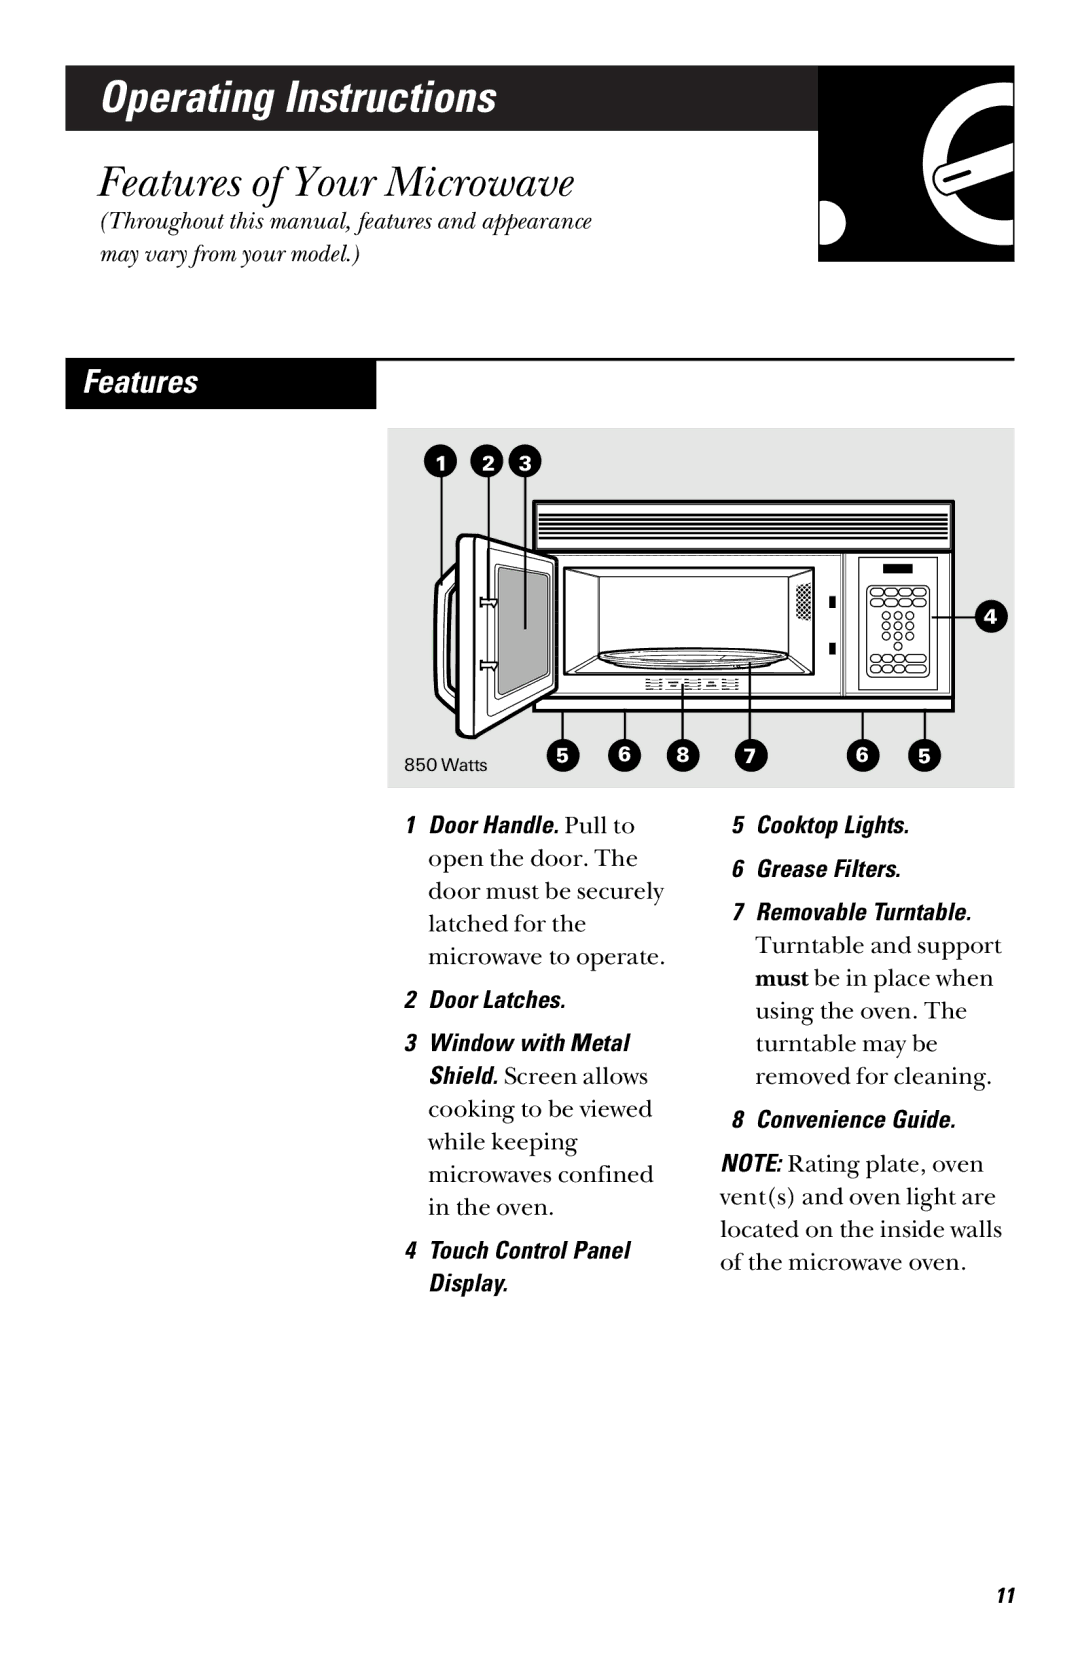 GE RVM1335 owner manual Operating Instructions, Features of Your Microwave, Convenience Guide 